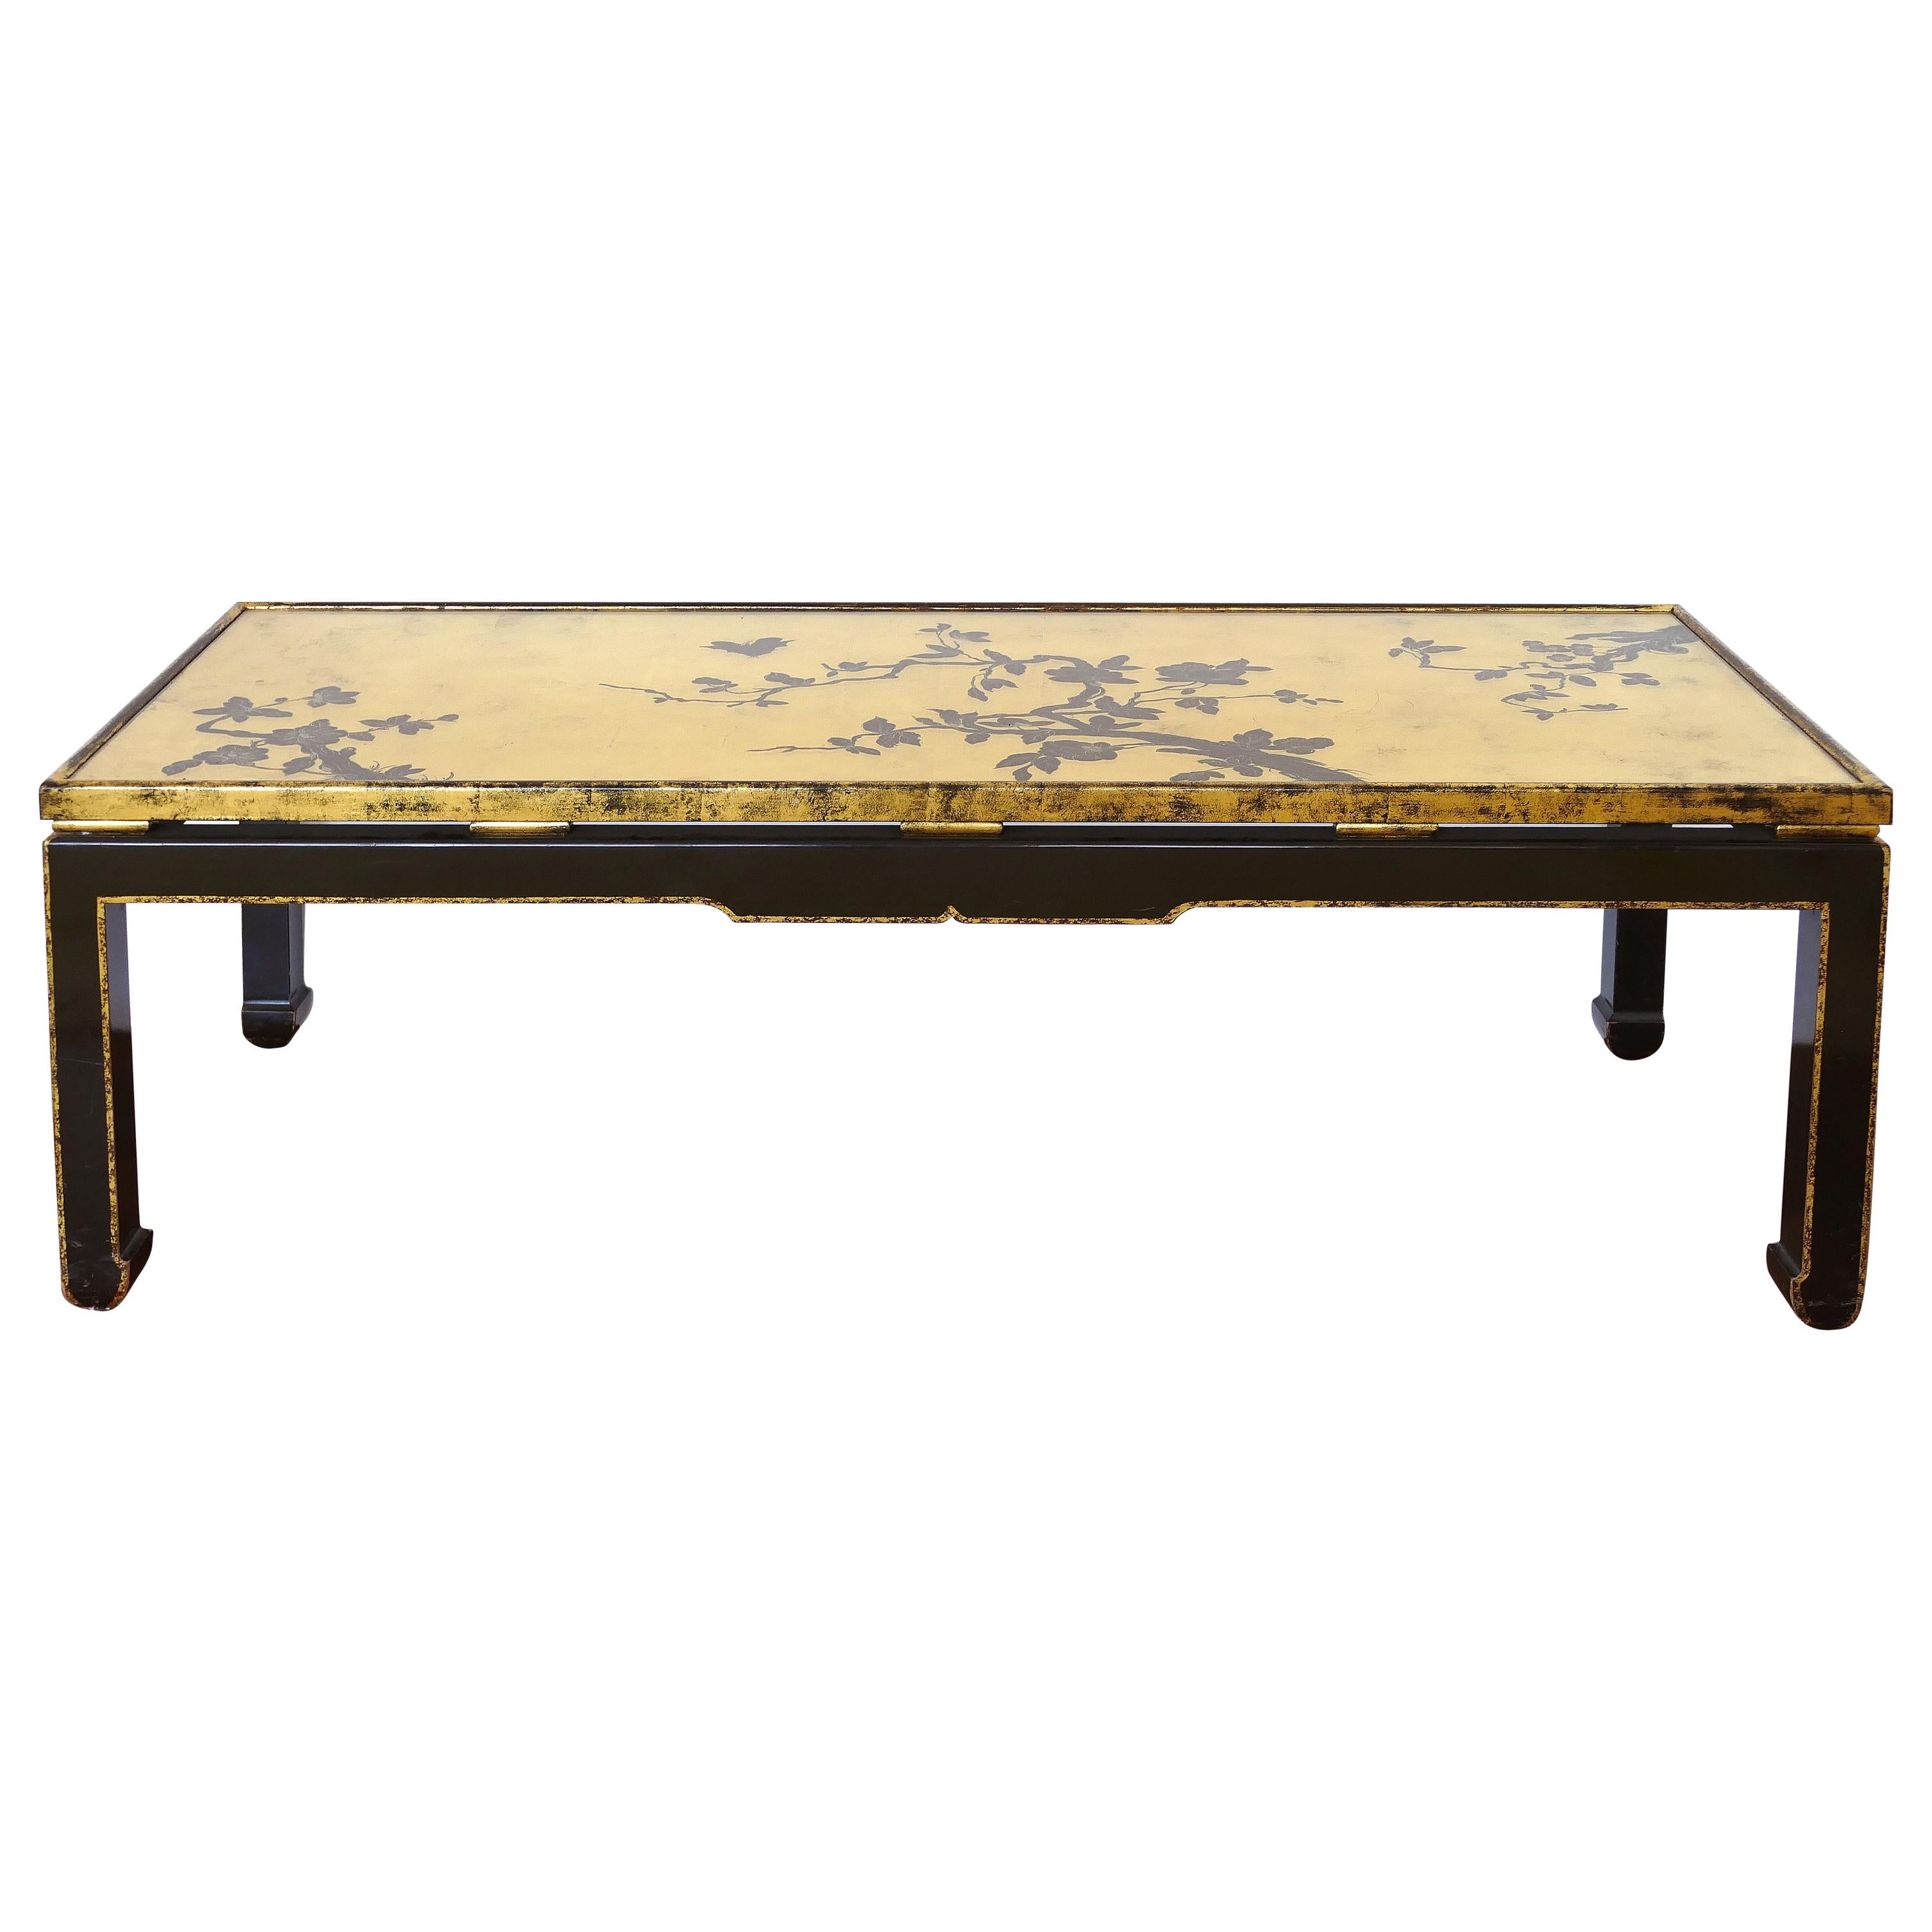 Mid-century Japanese Gold Leaf Cherry Blossom Coffee Table with Inset Glass